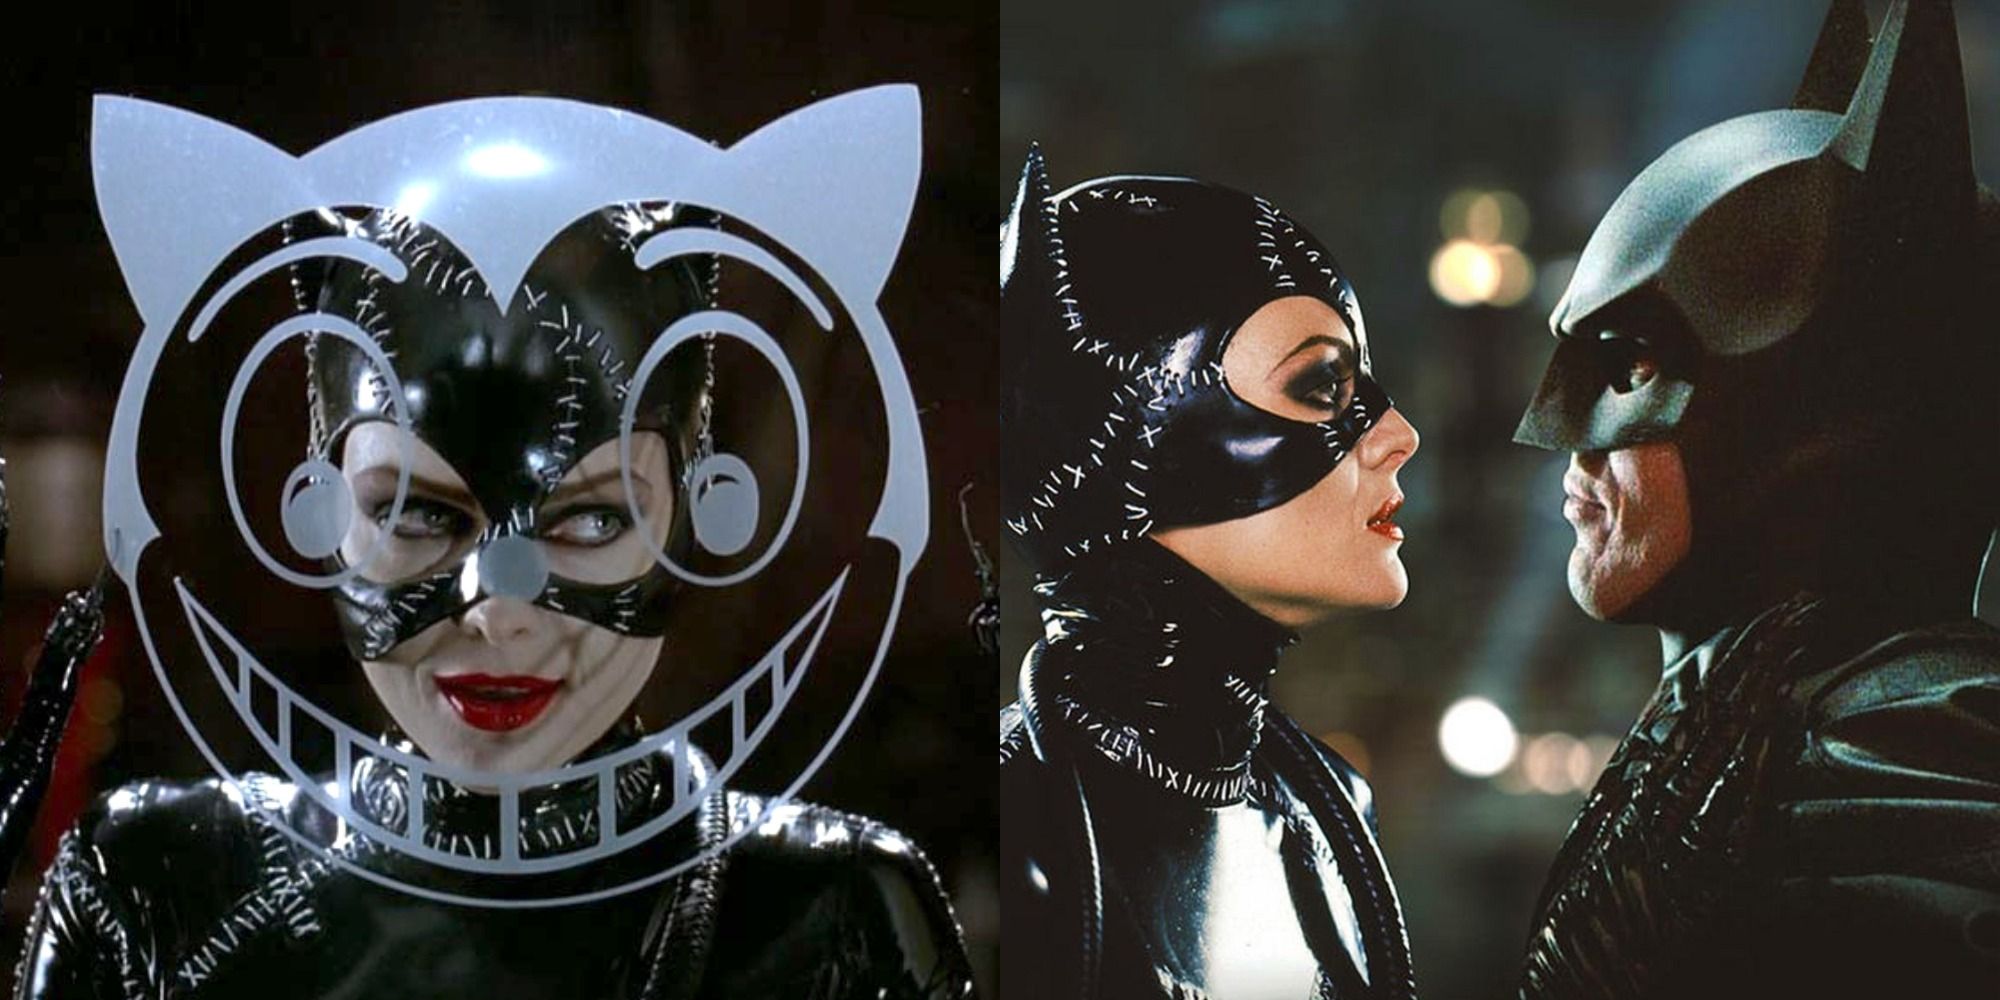 Split image showing Catwoman against a window and with Batman in Batman Returns